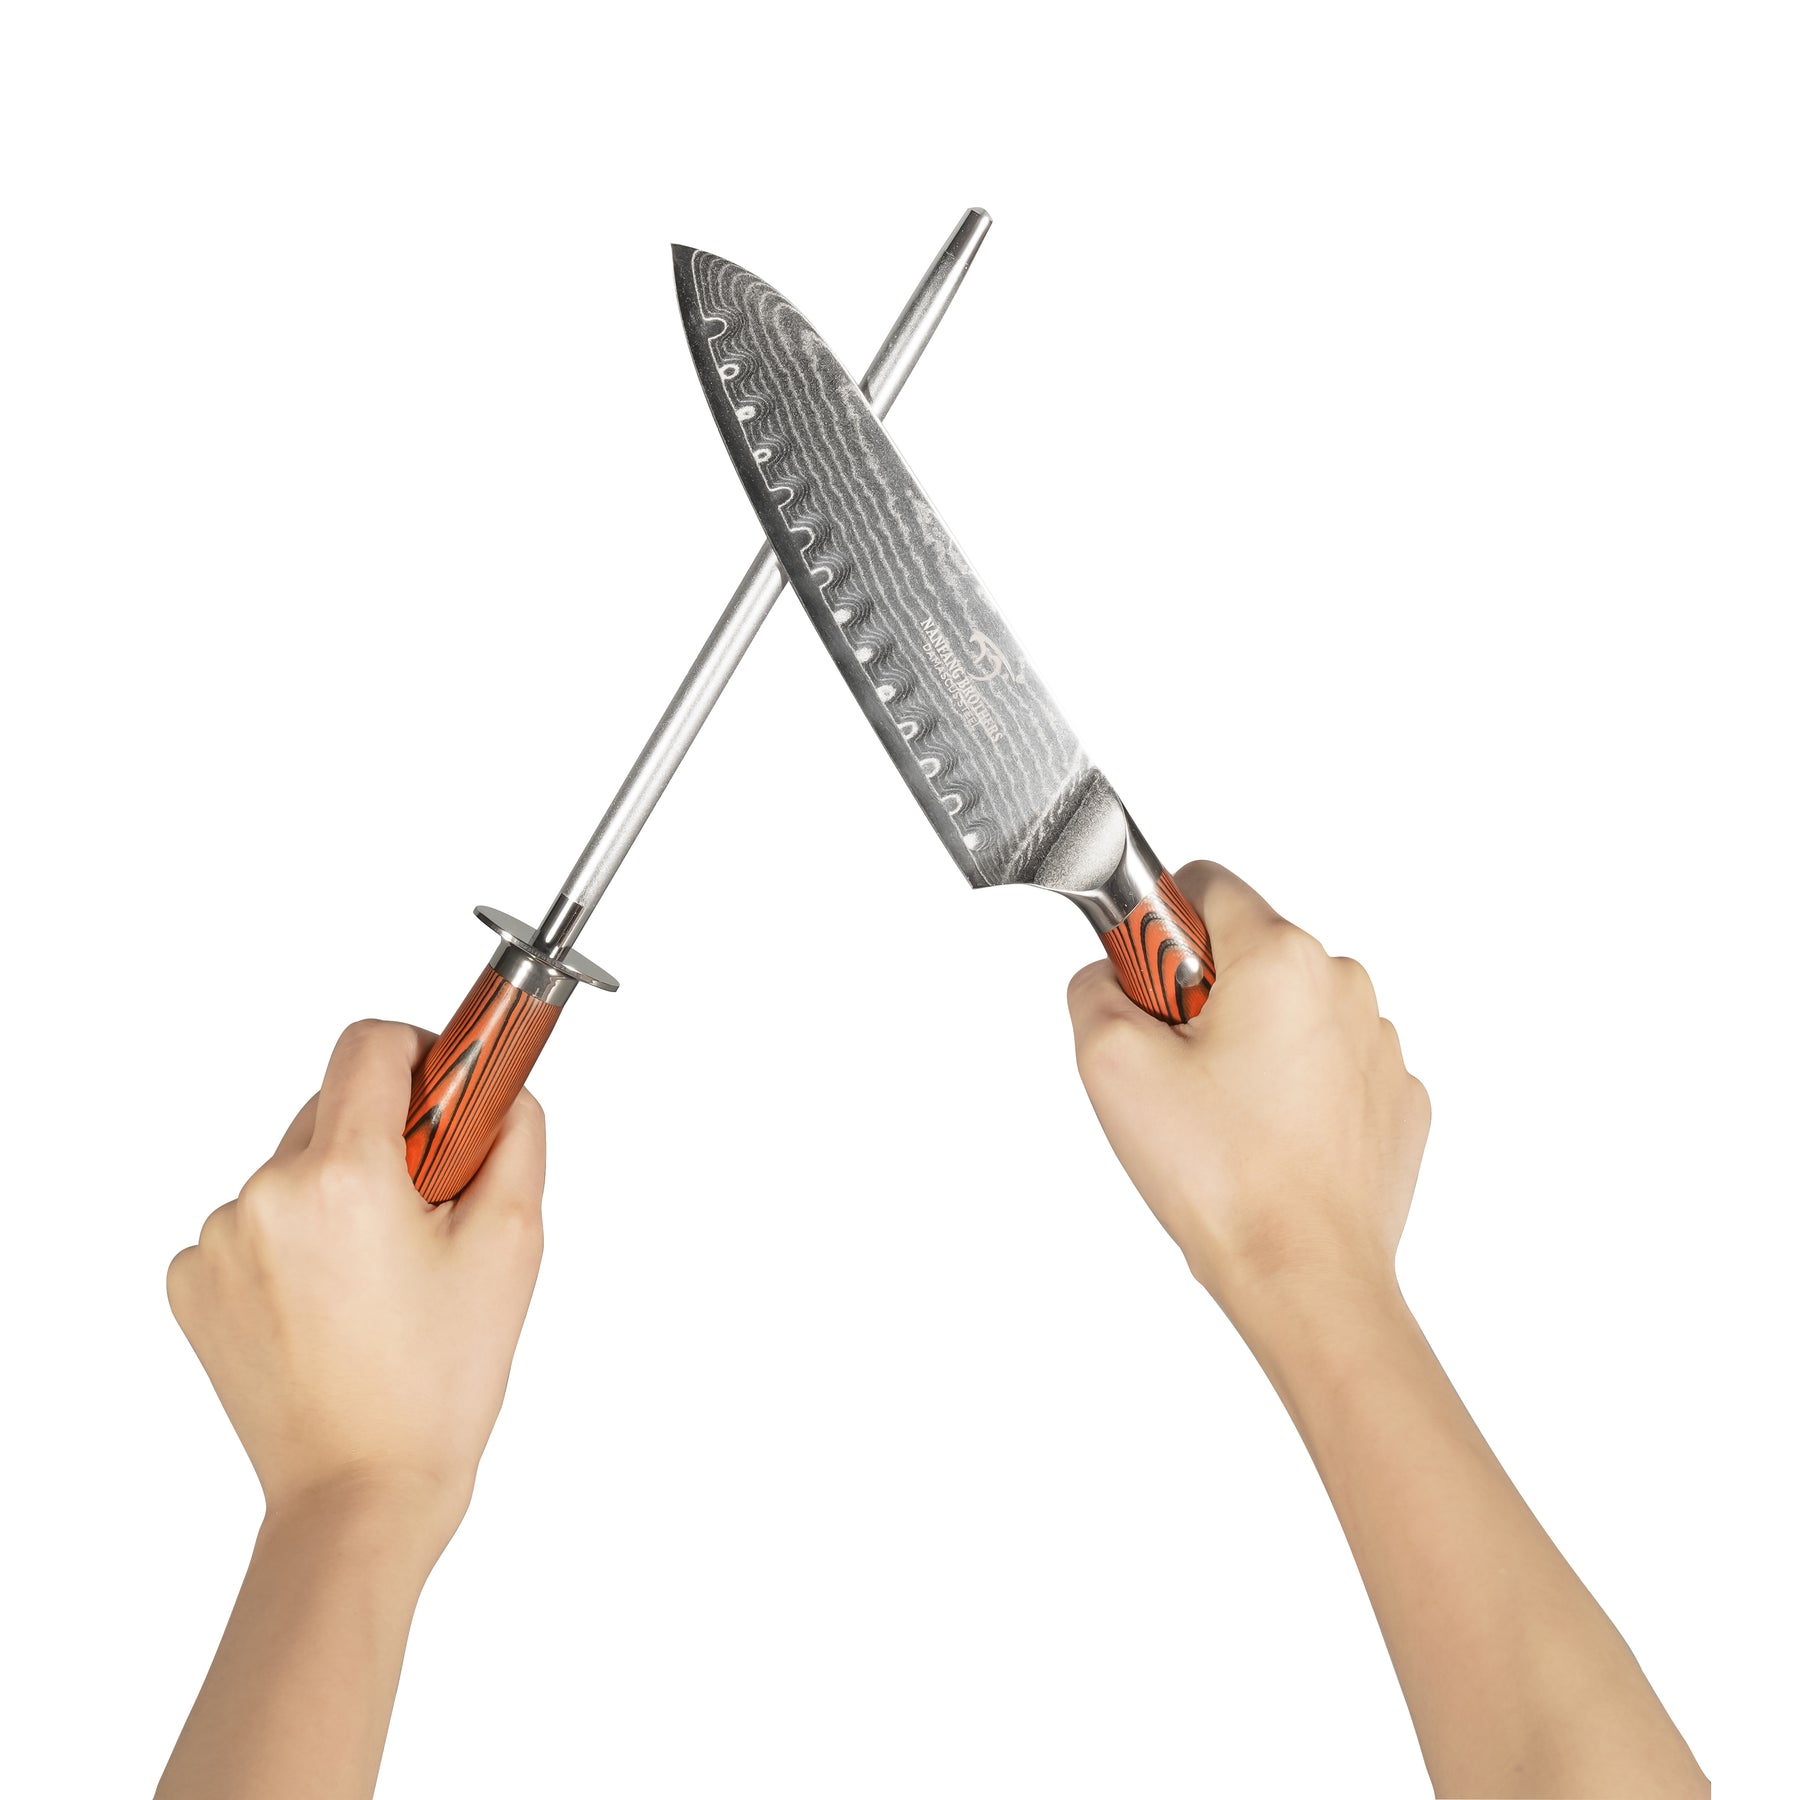 What is a knife sharpening kit and how do you use it?